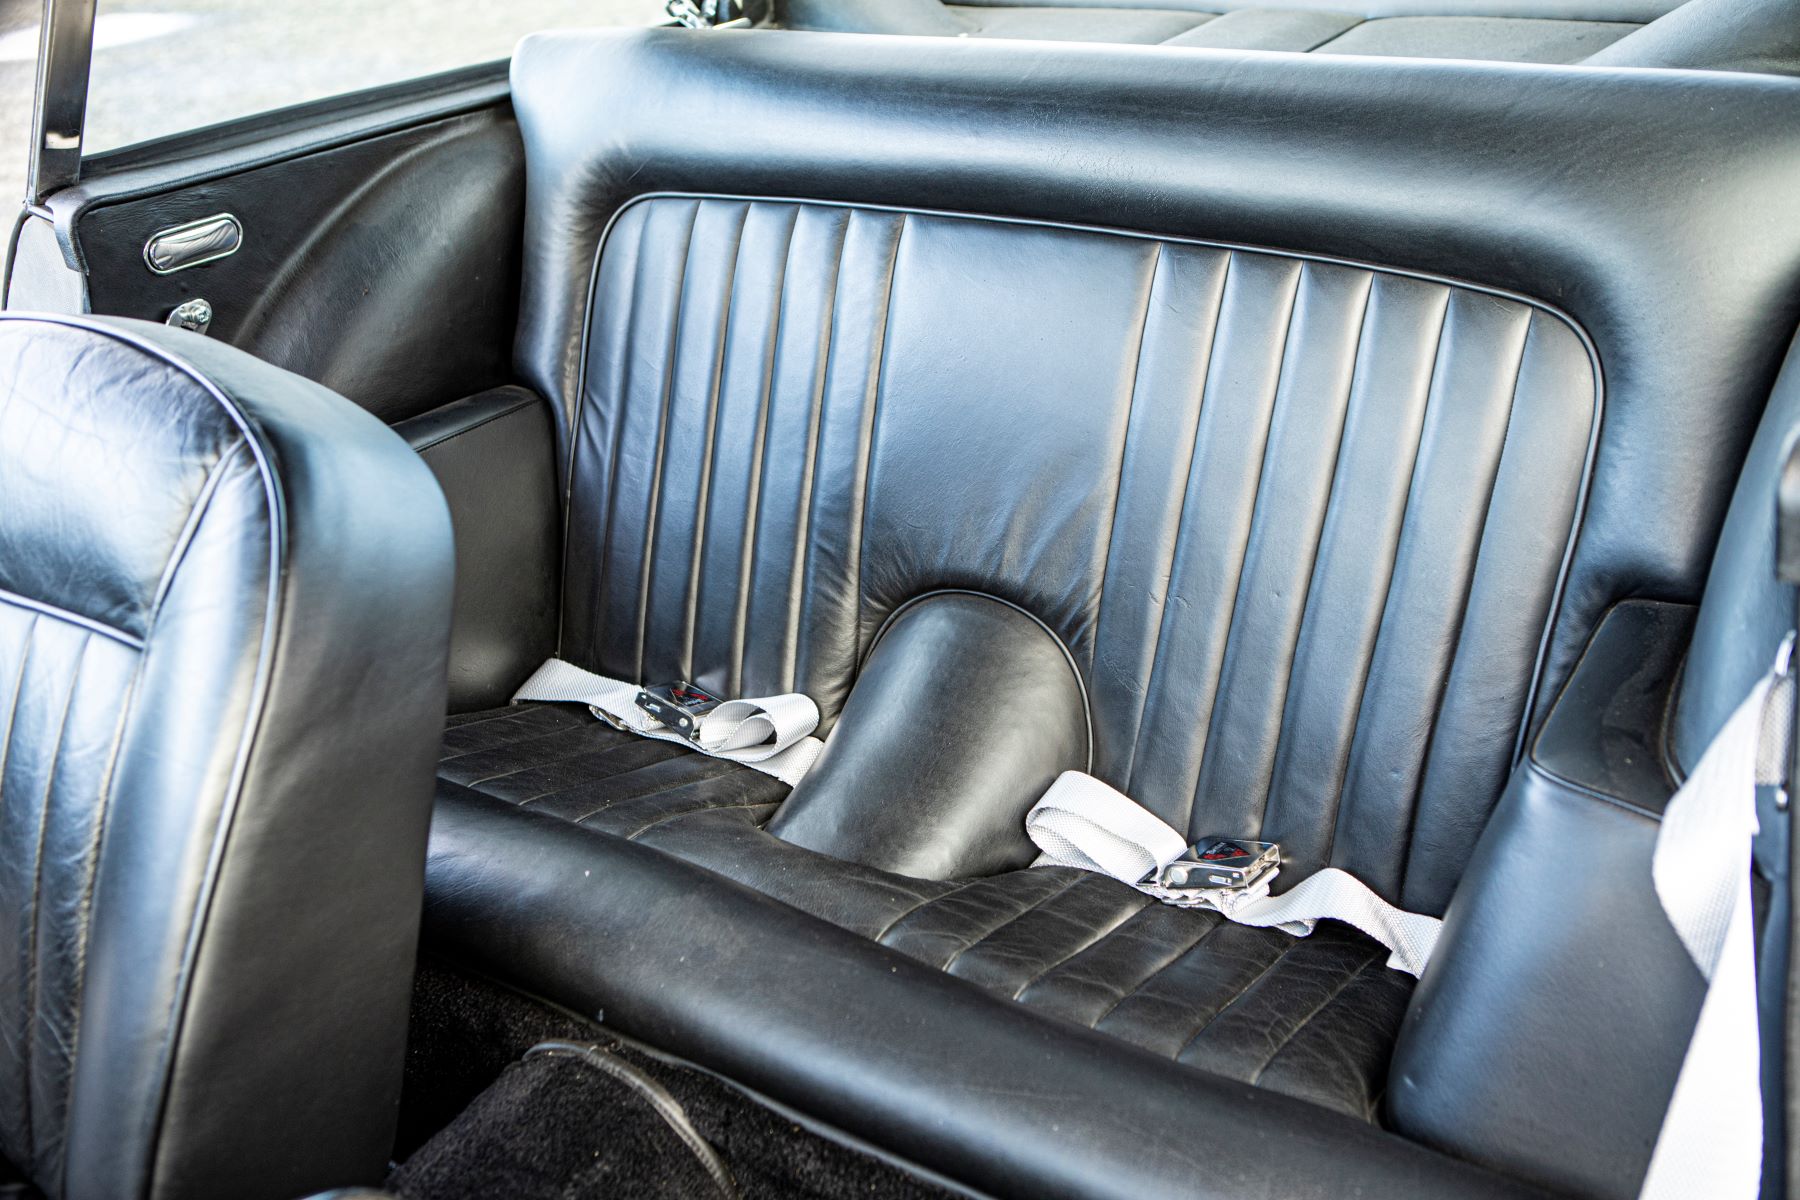 Rear seat upholstery of a 1965 Aston Martin DB5 from the National Motor Museum